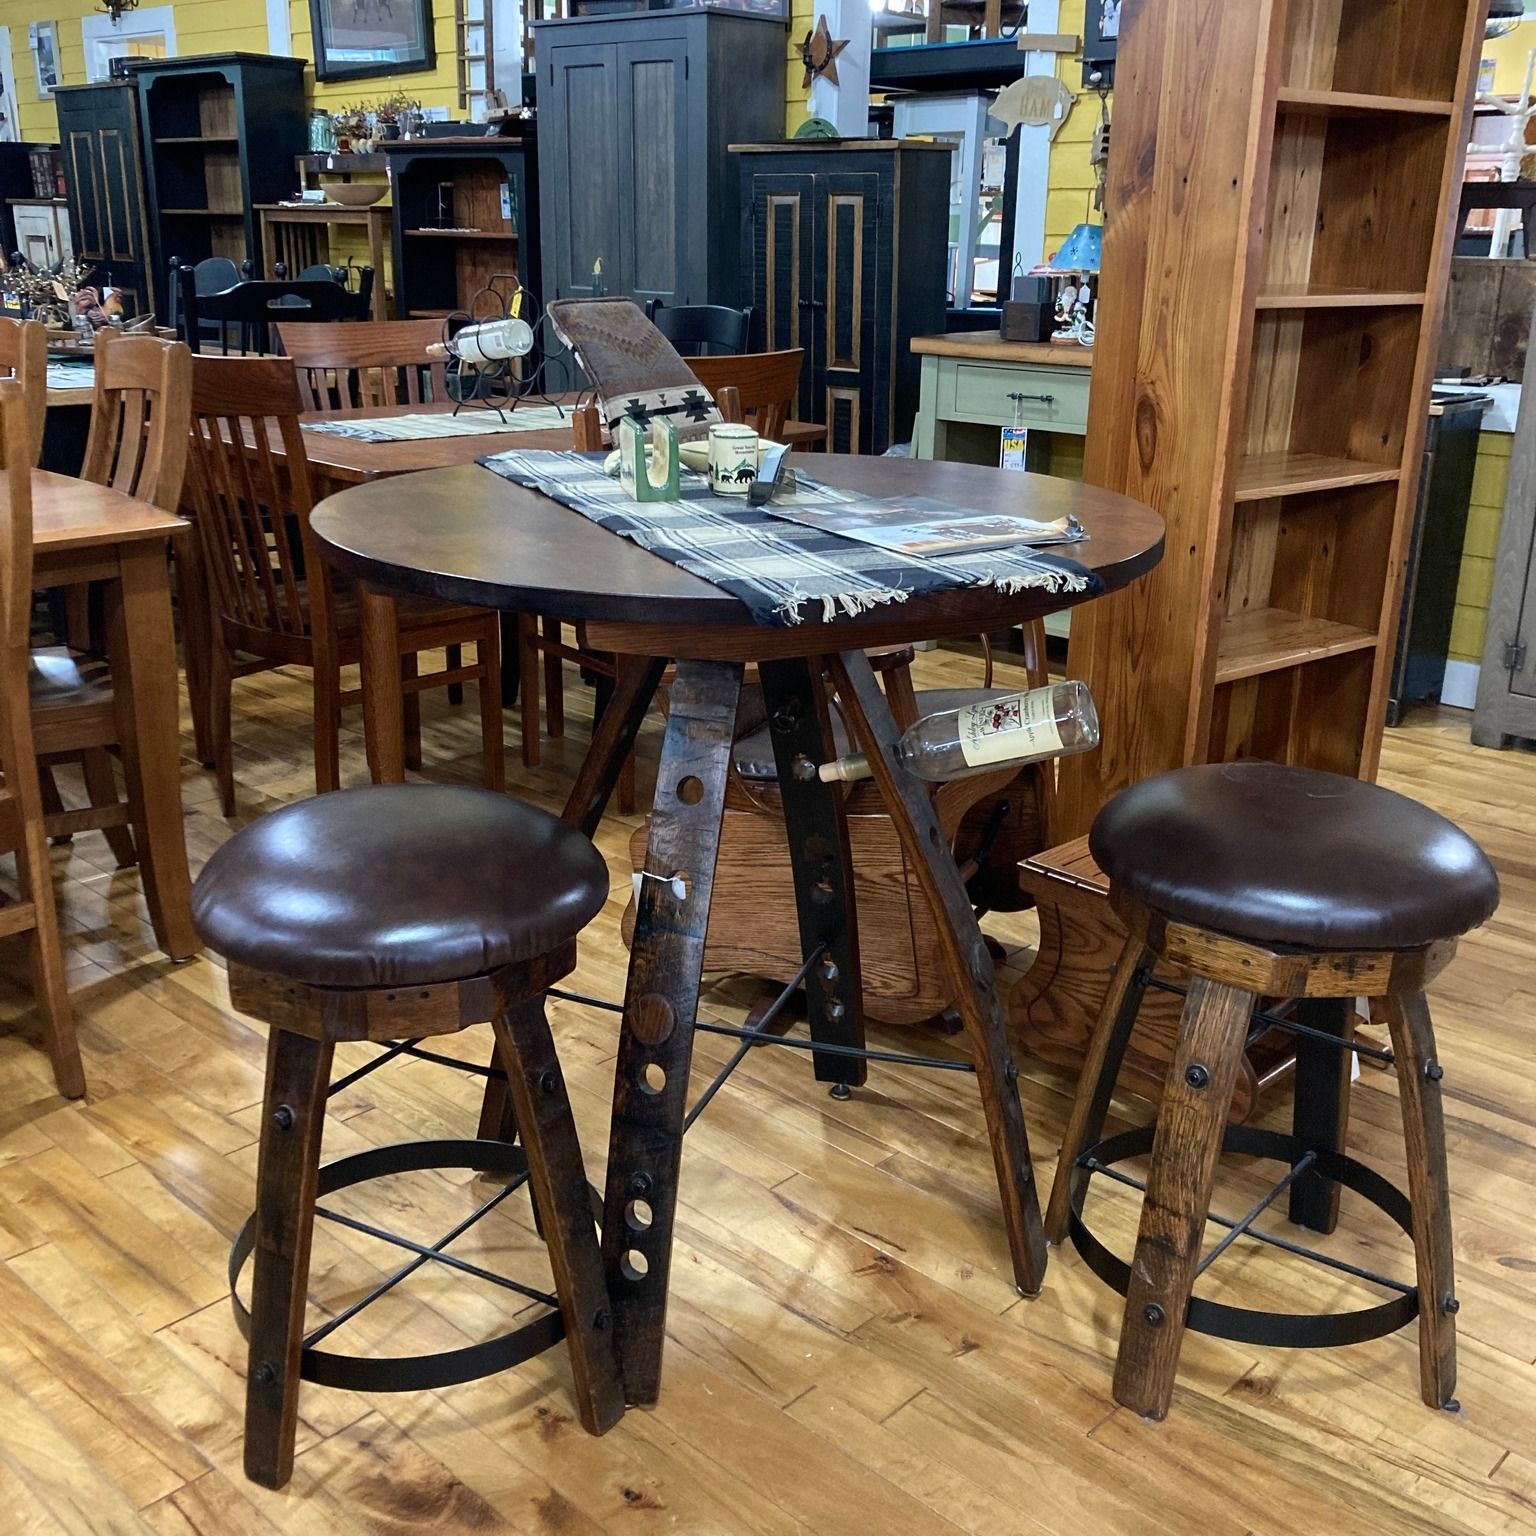 Amish furniture in New York